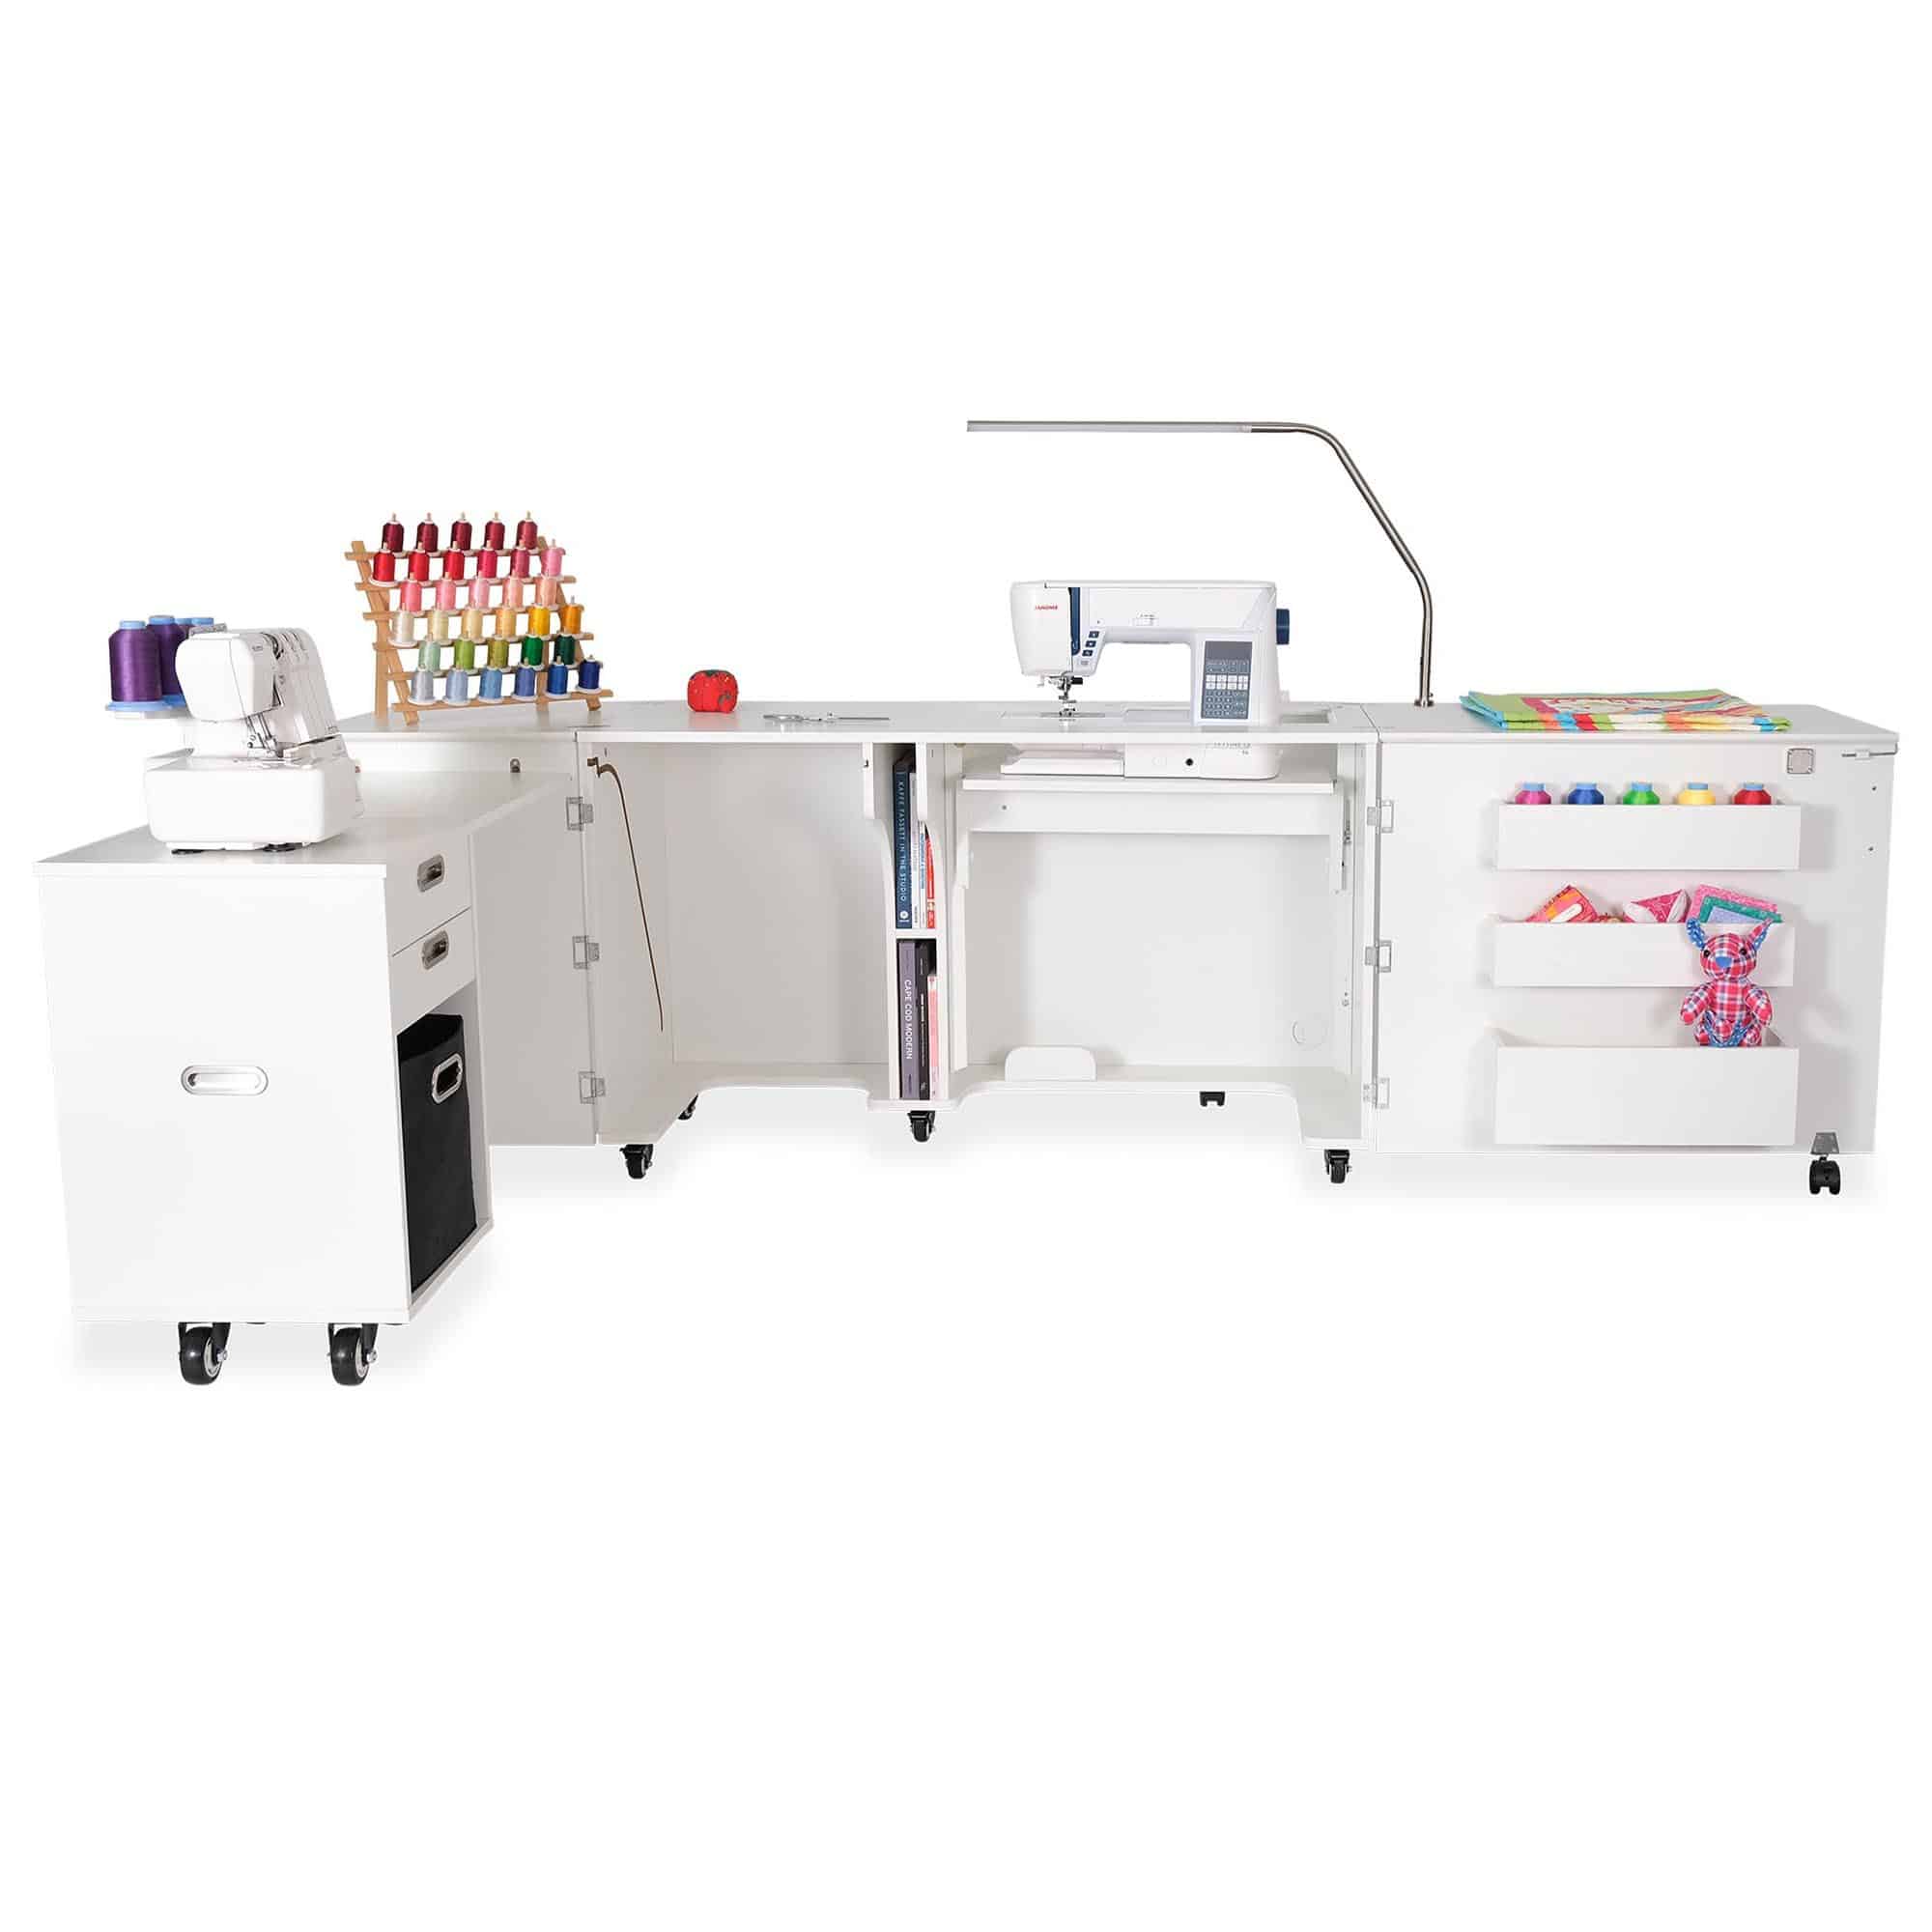 Aussie Sewing Cabinet is a signature, full-size sewing cabinet from Kangaroo Sewing Furniture. Supplied by Arrow Sewing